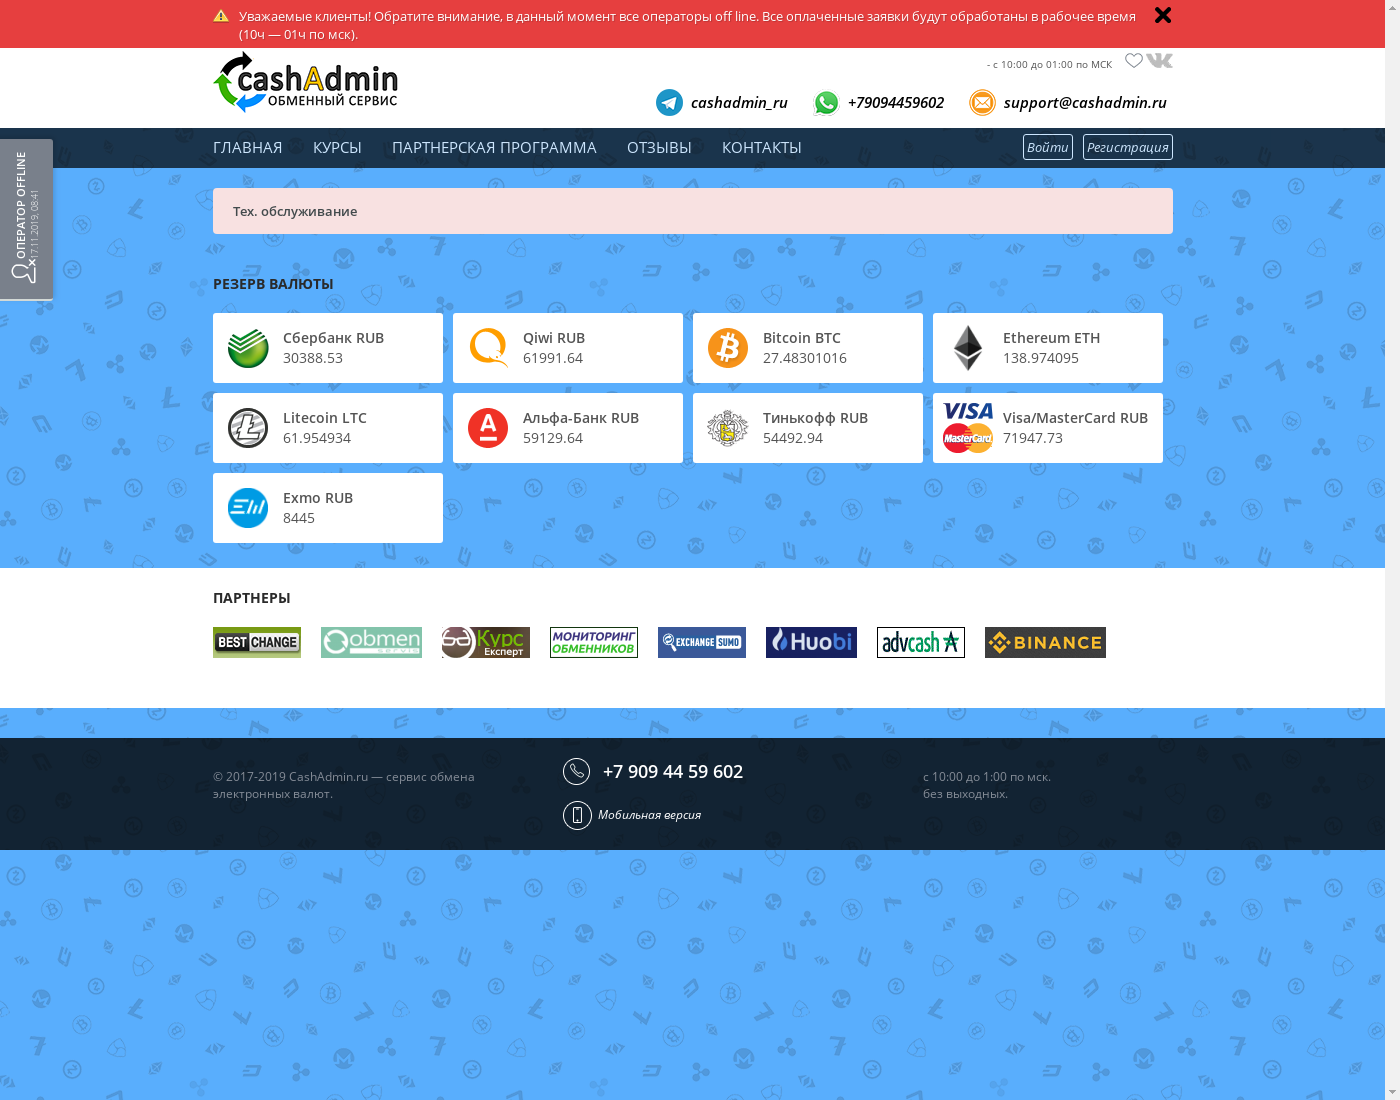 cashadmin user interface: the home page in English